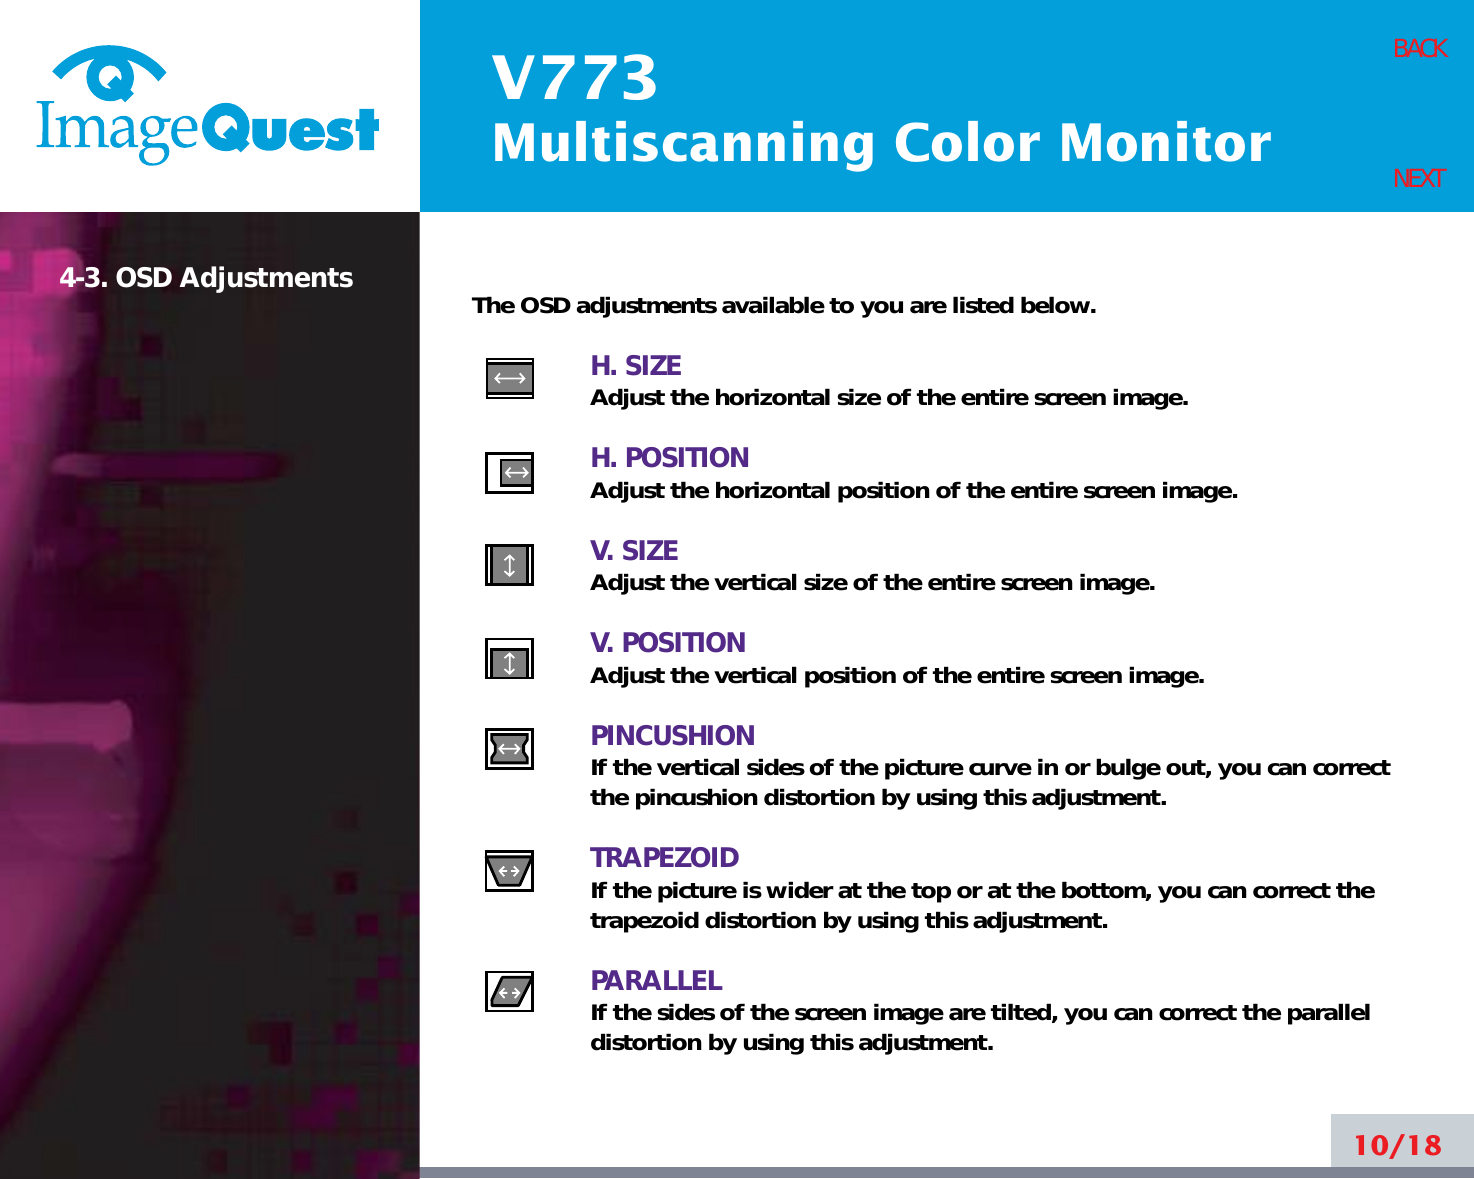 V773Multiscanning Color Monitor10/18BACKNEXT4-3. OSD Adjustments The OSD adjustments available to you are listed below.H. SIZEAdjust the horizontal size of the entire screen image.H. POSITIONAdjust the horizontal position of the entire screen image.V. SIZEAdjust the vertical size of the entire screen image.V. POSITIONAdjust the vertical position of the entire screen image.PINCUSHIONIf the vertical sides of the picture curve in or bulge out, you can correctthe pincushion distortion by using this adjustment.TRAPEZOIDIf the picture is wider at the top or at the bottom, you can correct thetrapezoid distortion by using this adjustment.PARALLELIf the sides of the screen image are tilted, you can correct the paralleldistortion by using this adjustment.